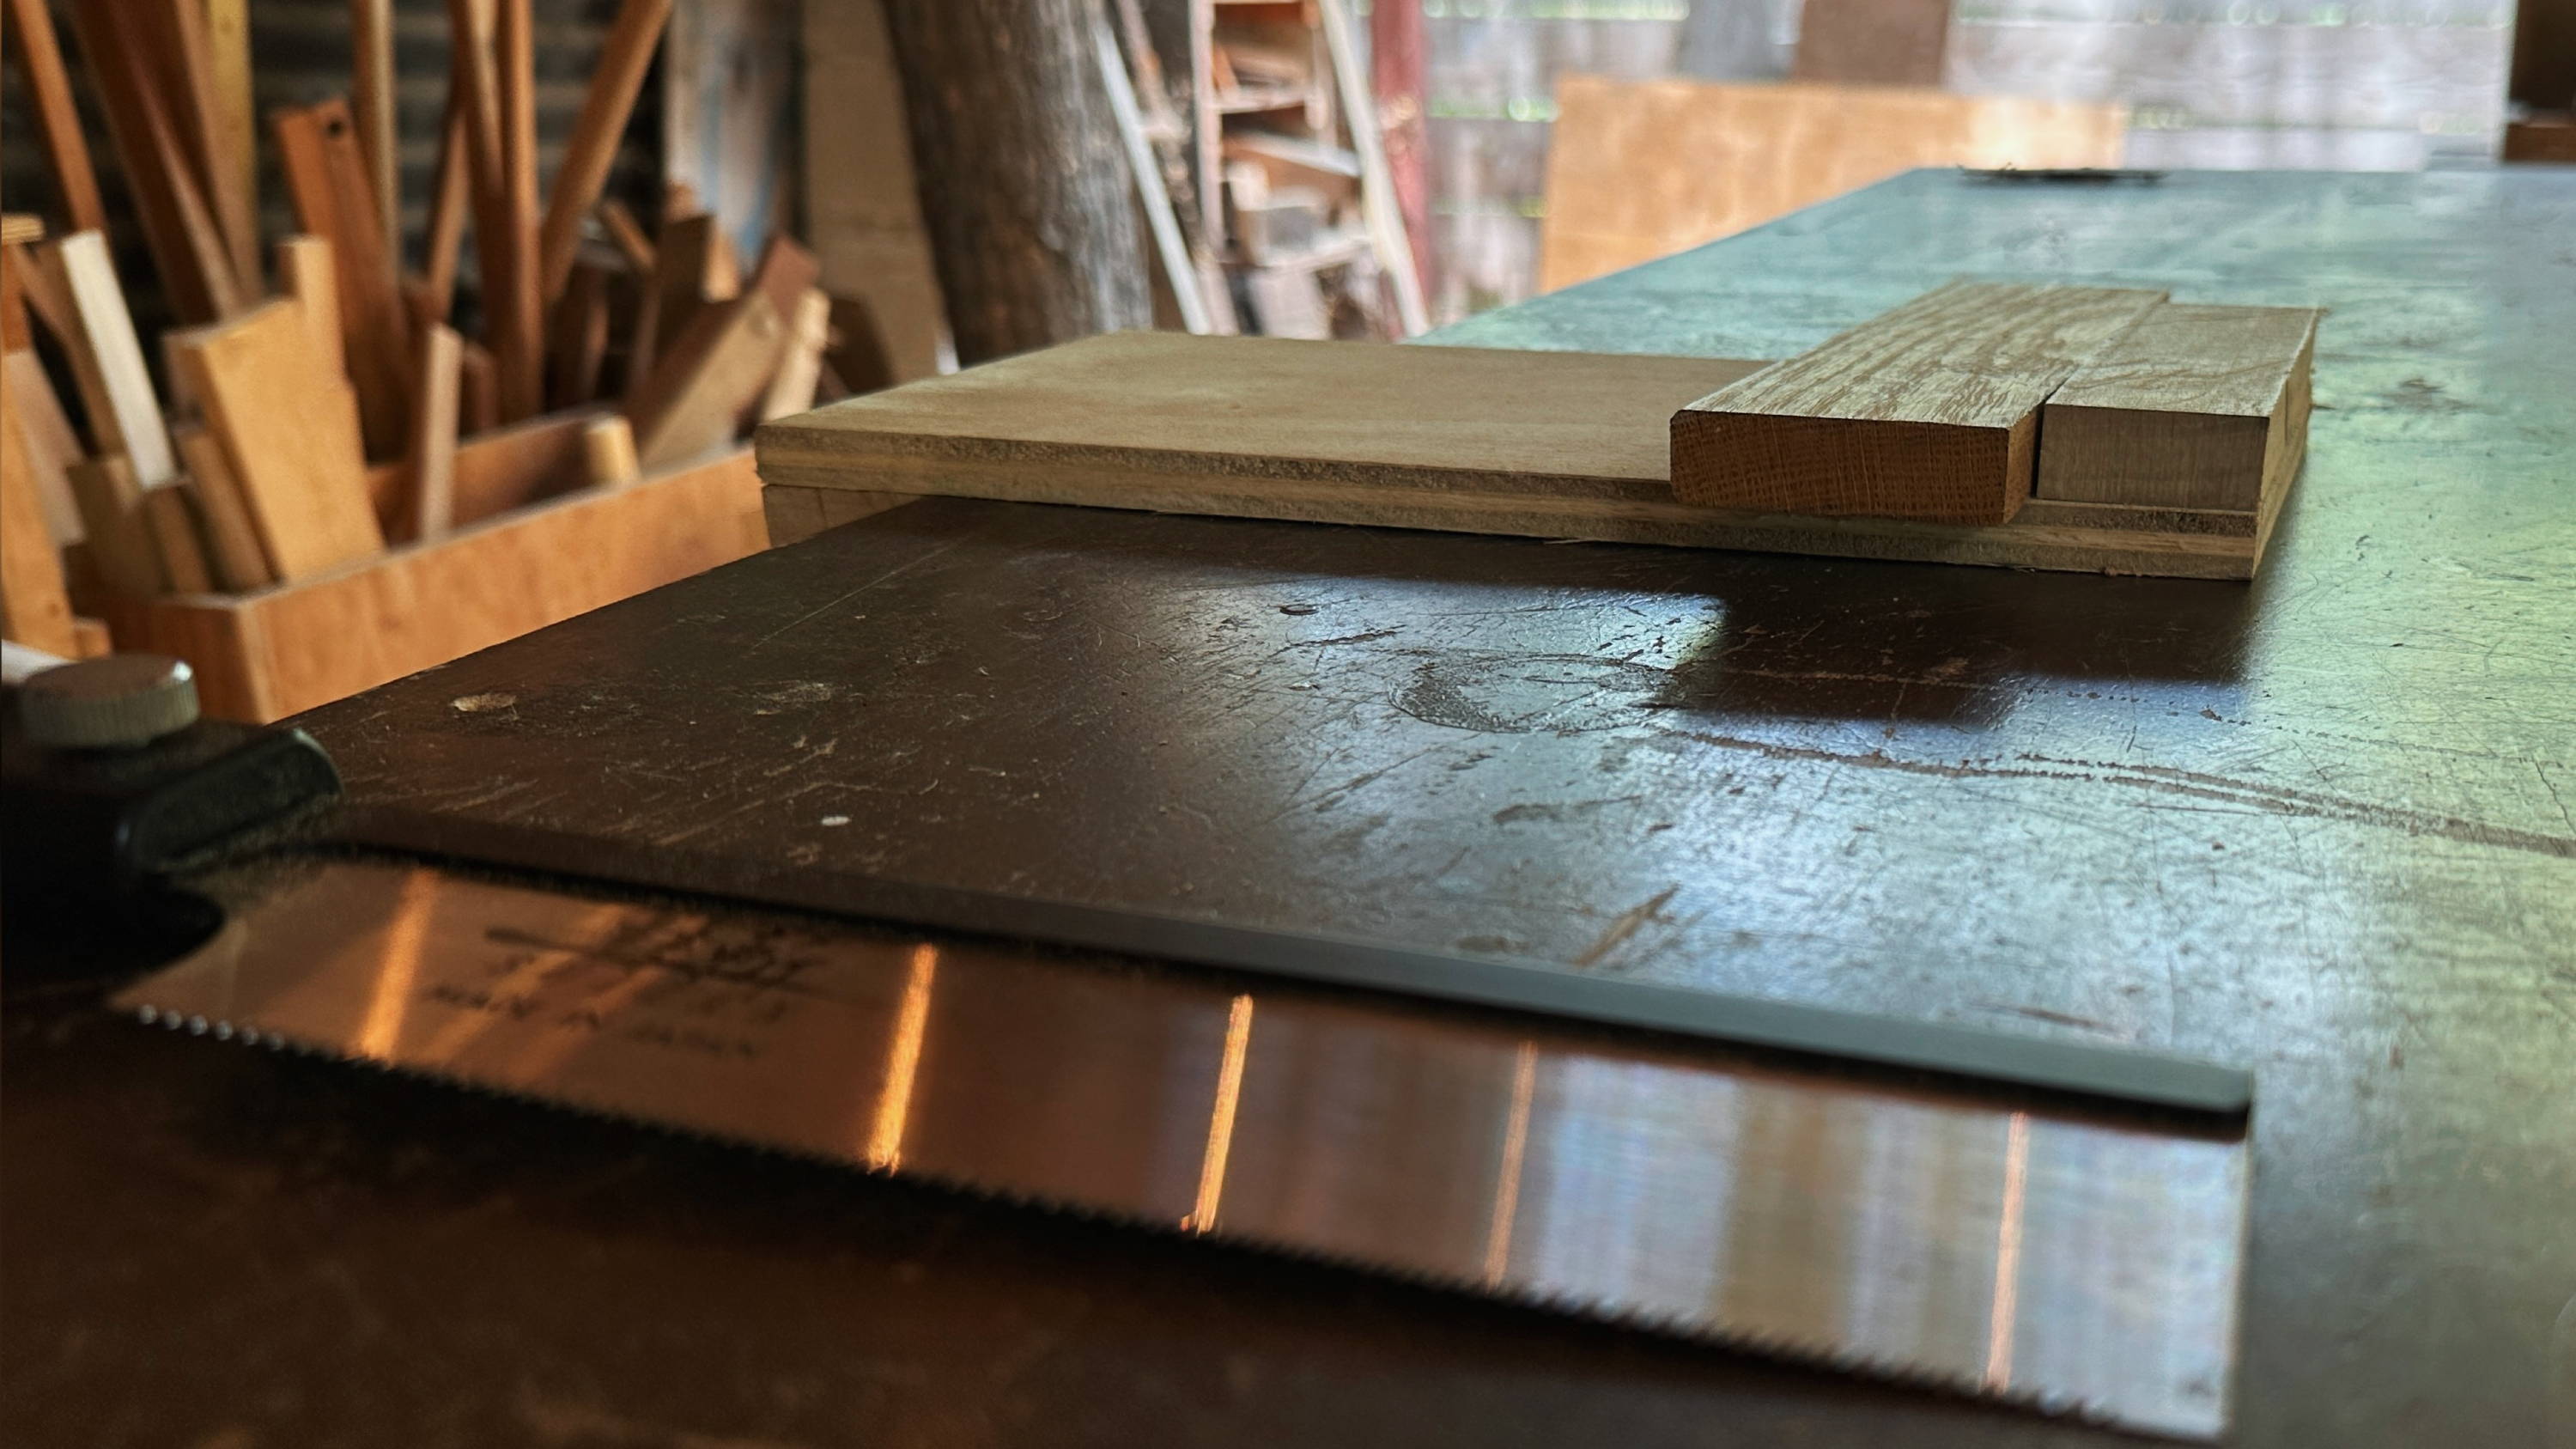 Bench Hooks: The Fastest Way to Steady Boards when Hand Sawing (Quick Tip)